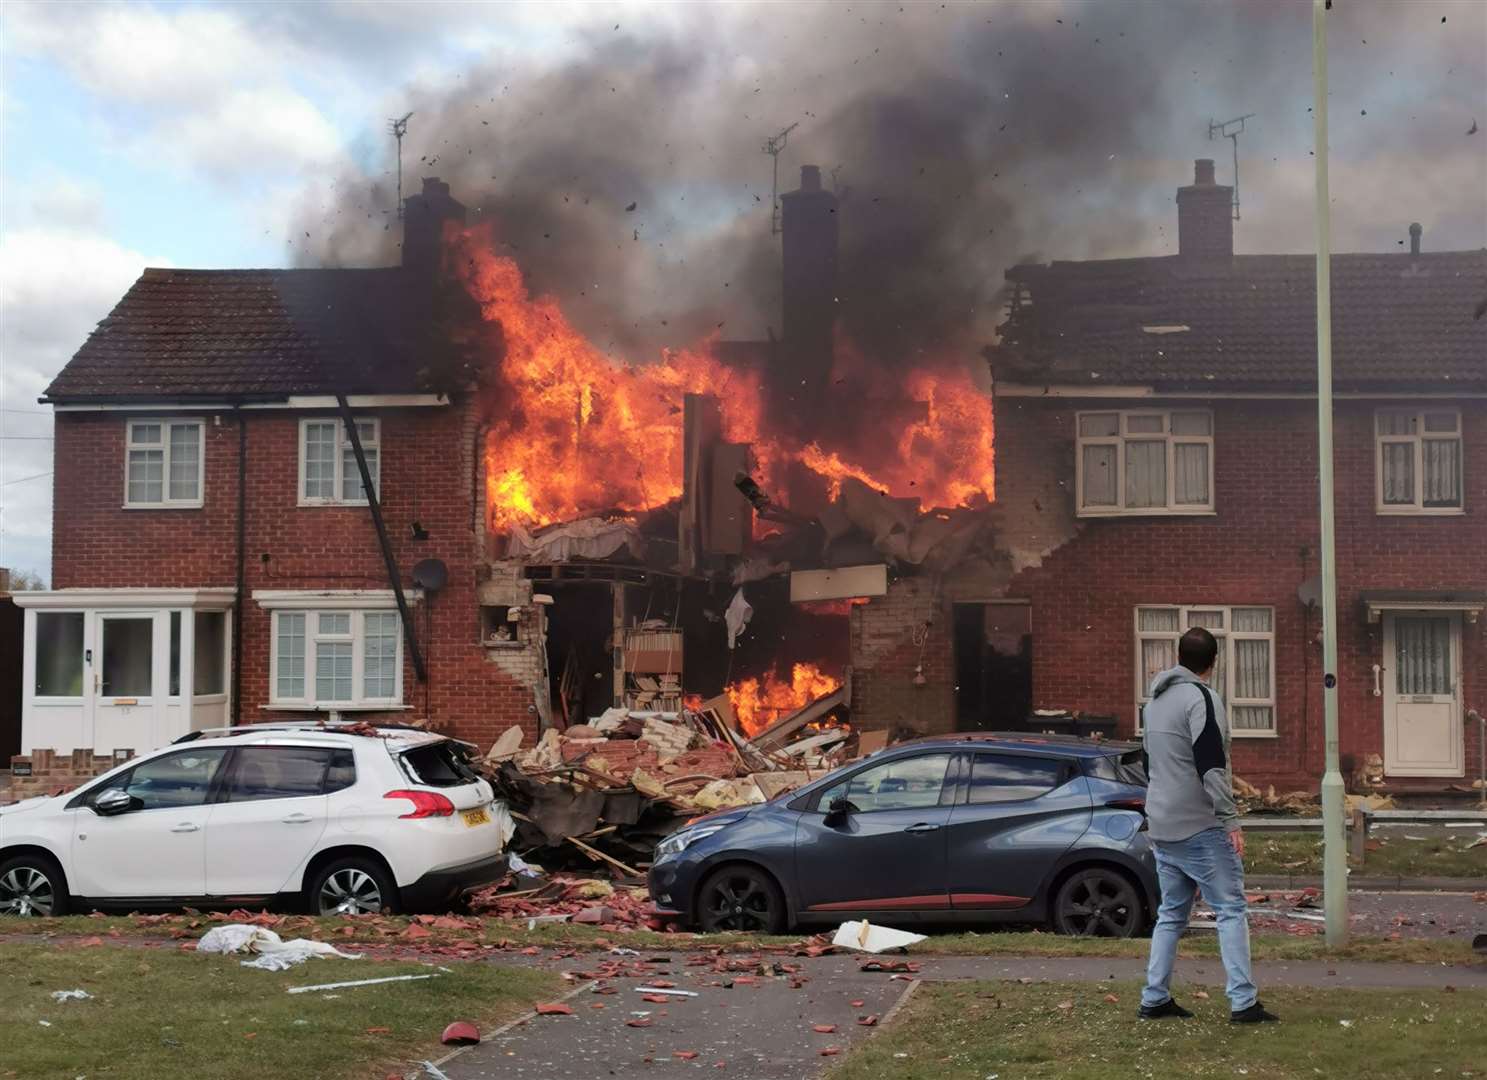 A leak from a portable heater sparked the explosion in May